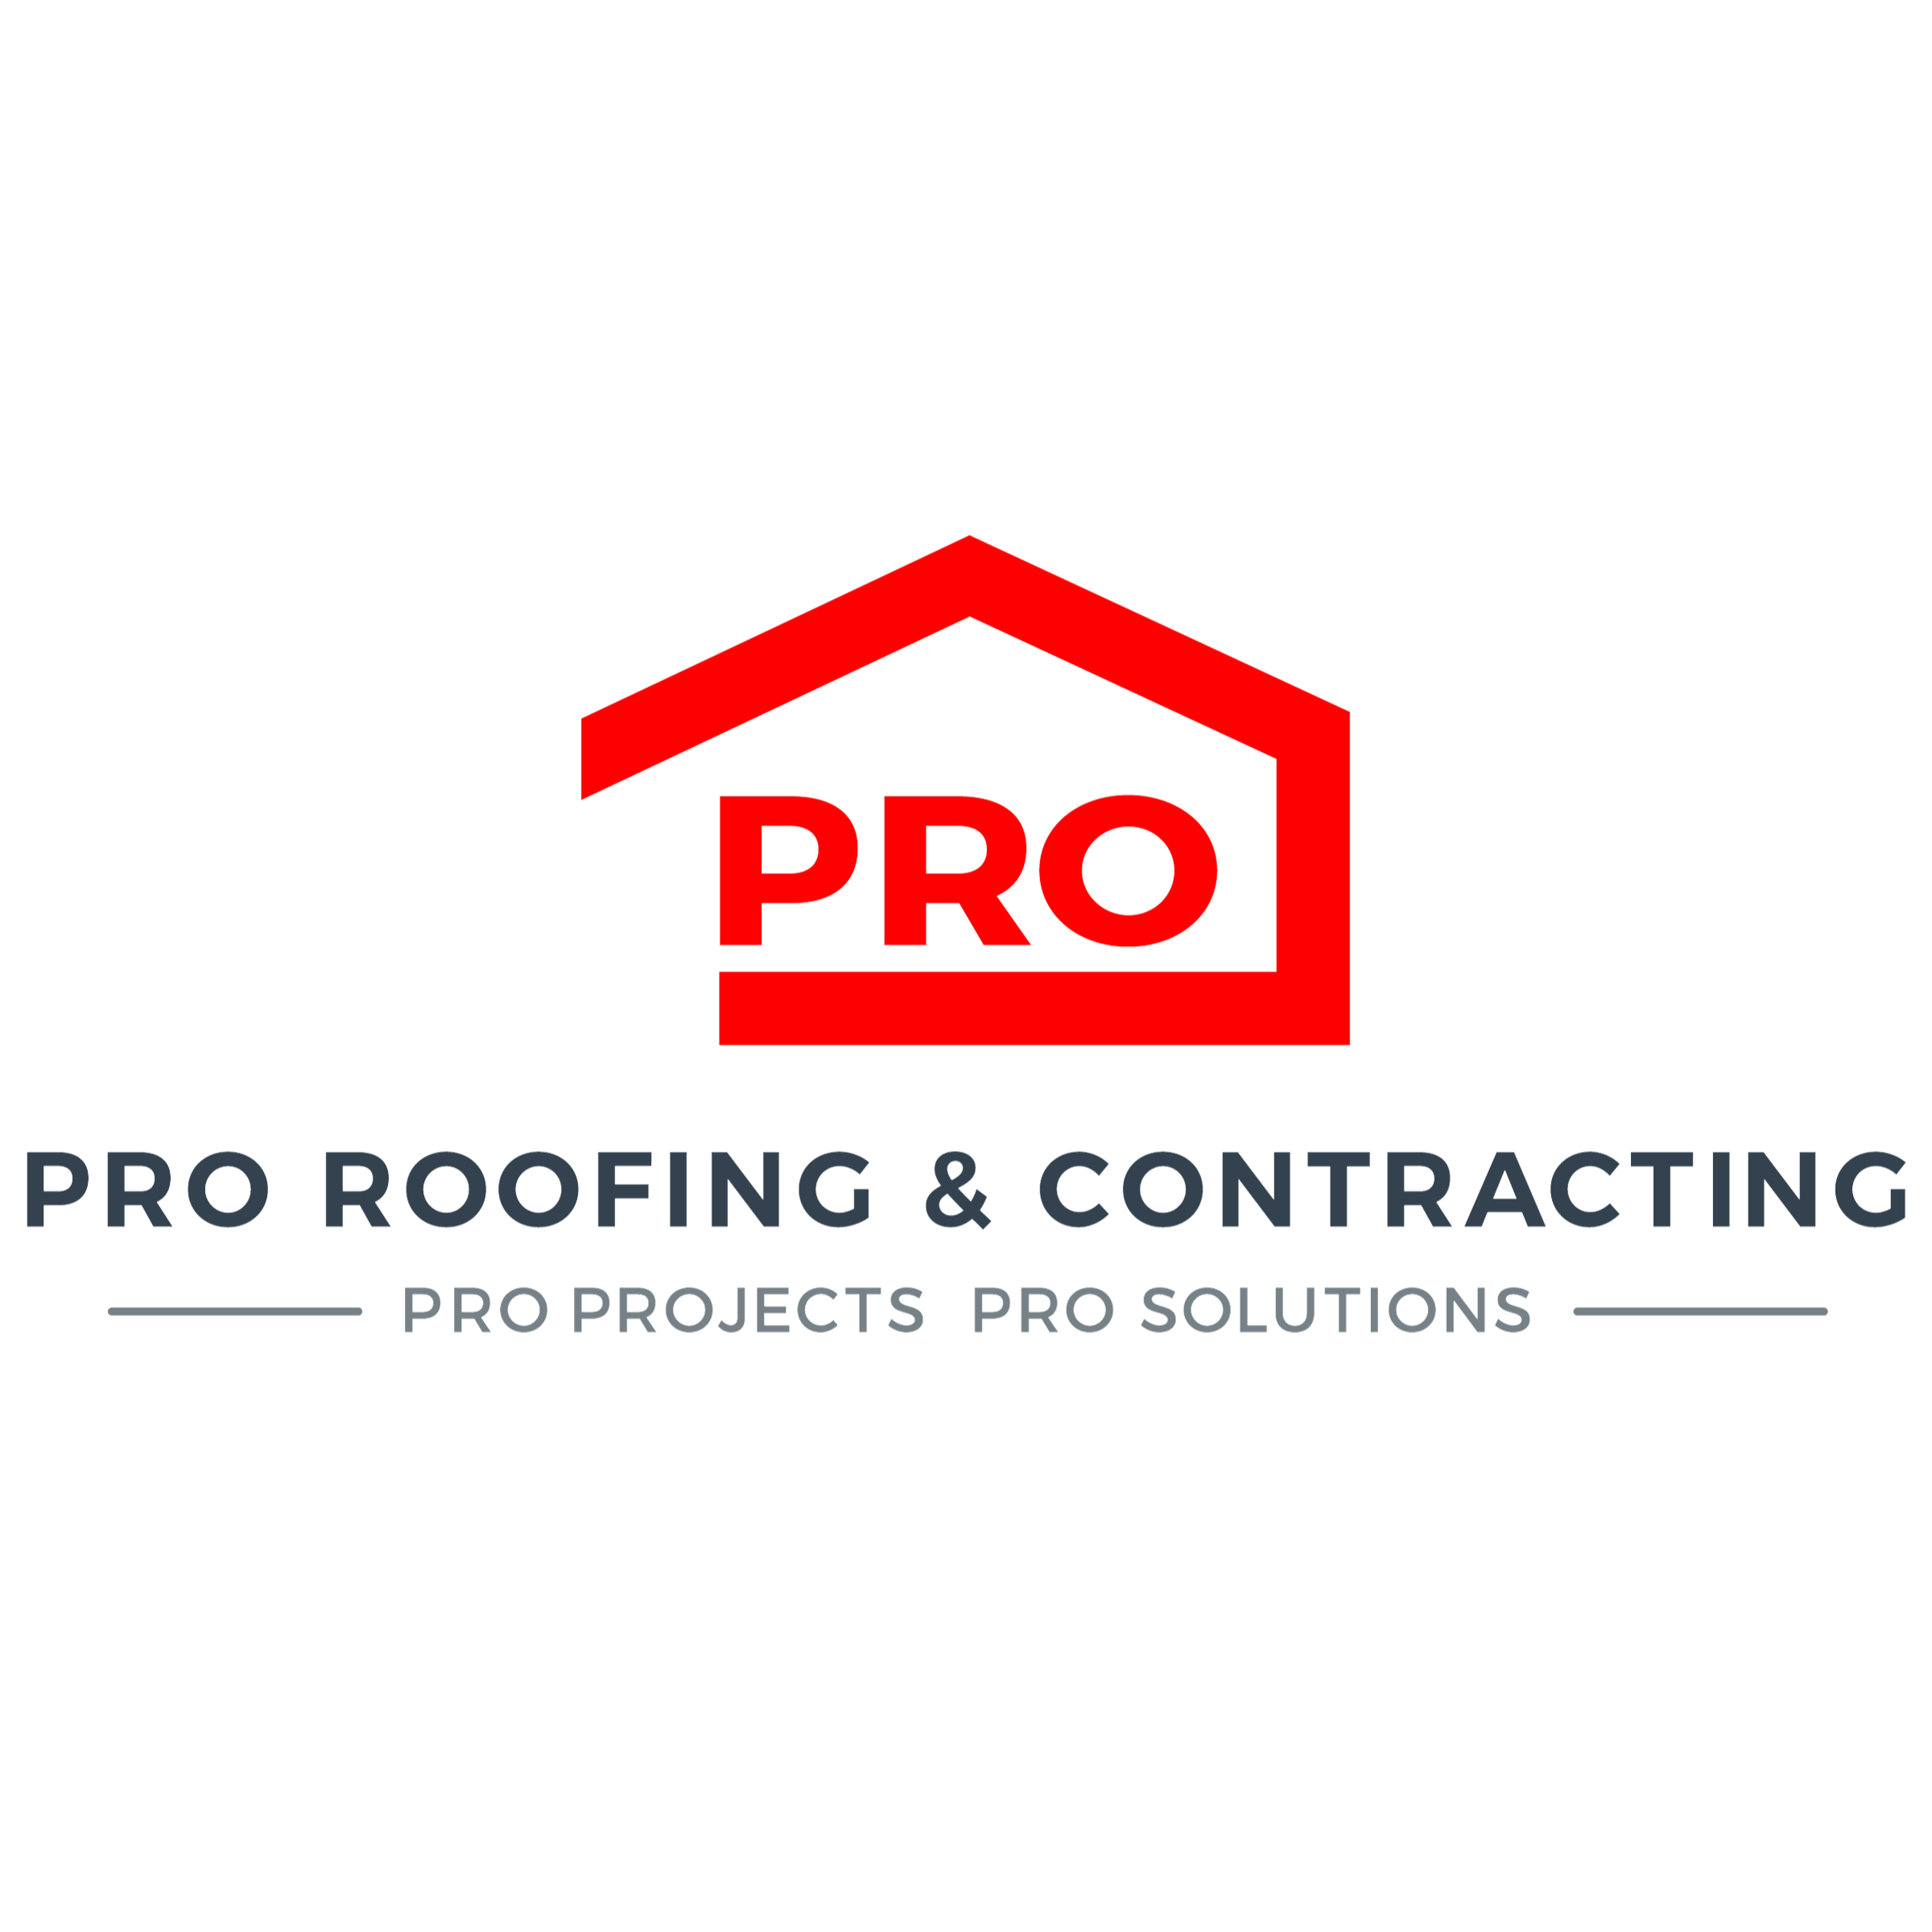 Pro Roofing & Contracting